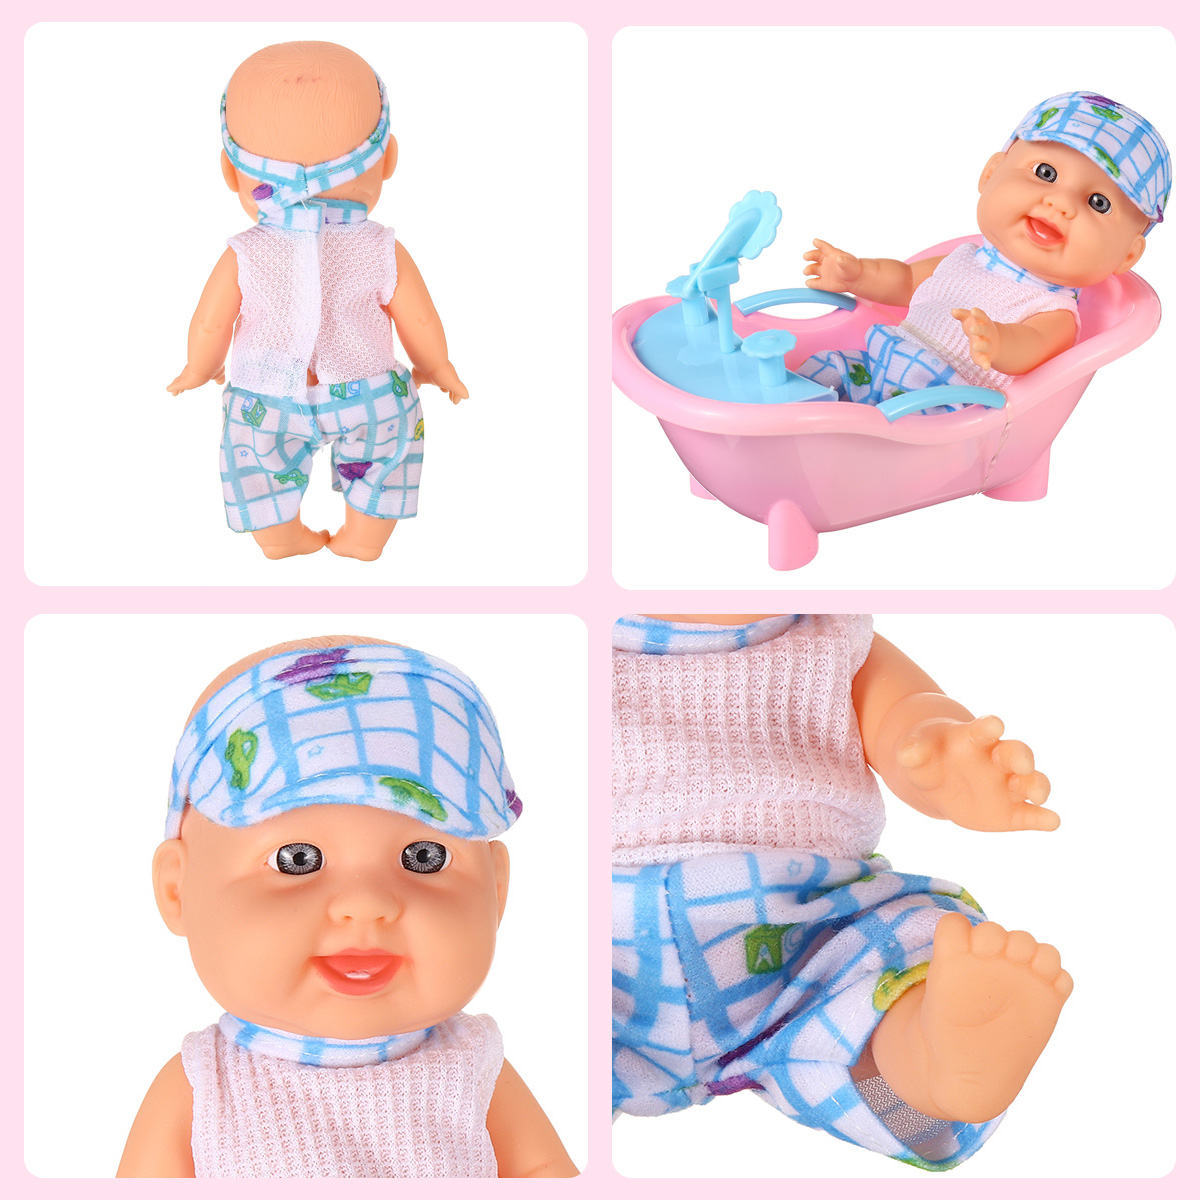 Simulation-Baby-3D-Creative-Cute-Doll-Play-House-Toy-Doll-Vinyl-Doll-Gift-1818656-3